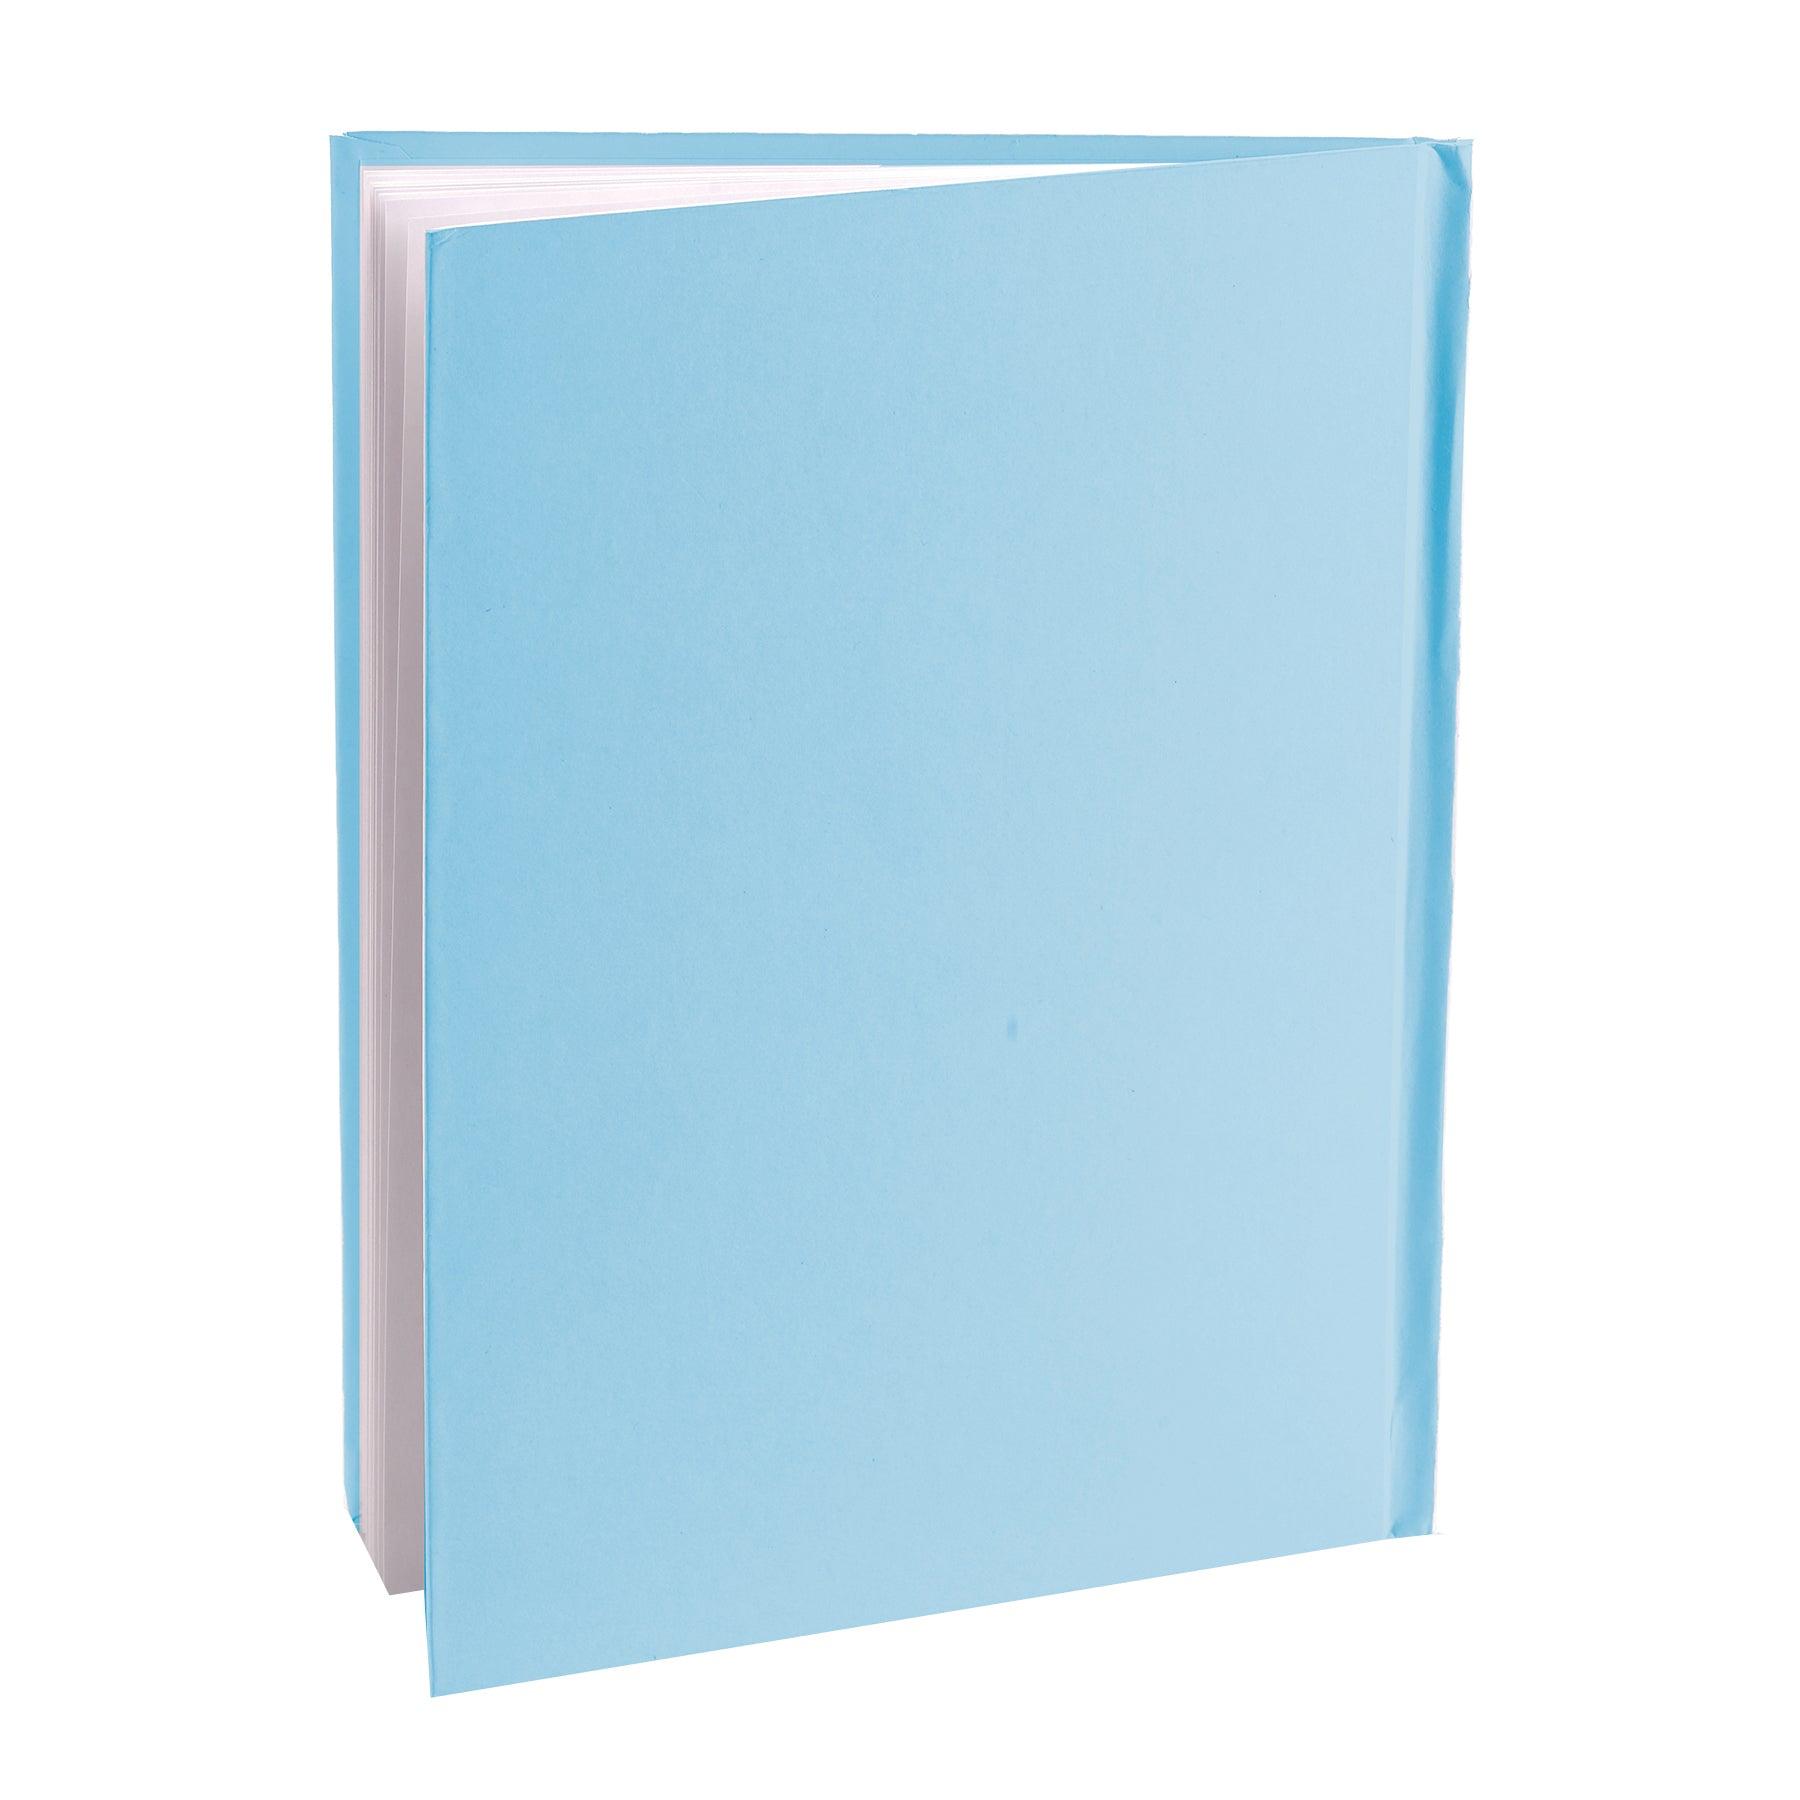 Blue Hardcover Blank Book, White Pages, 11"H x 8-1/2"W Portrait, 14 Sheets/28 Pages, Pack of 6 - Loomini